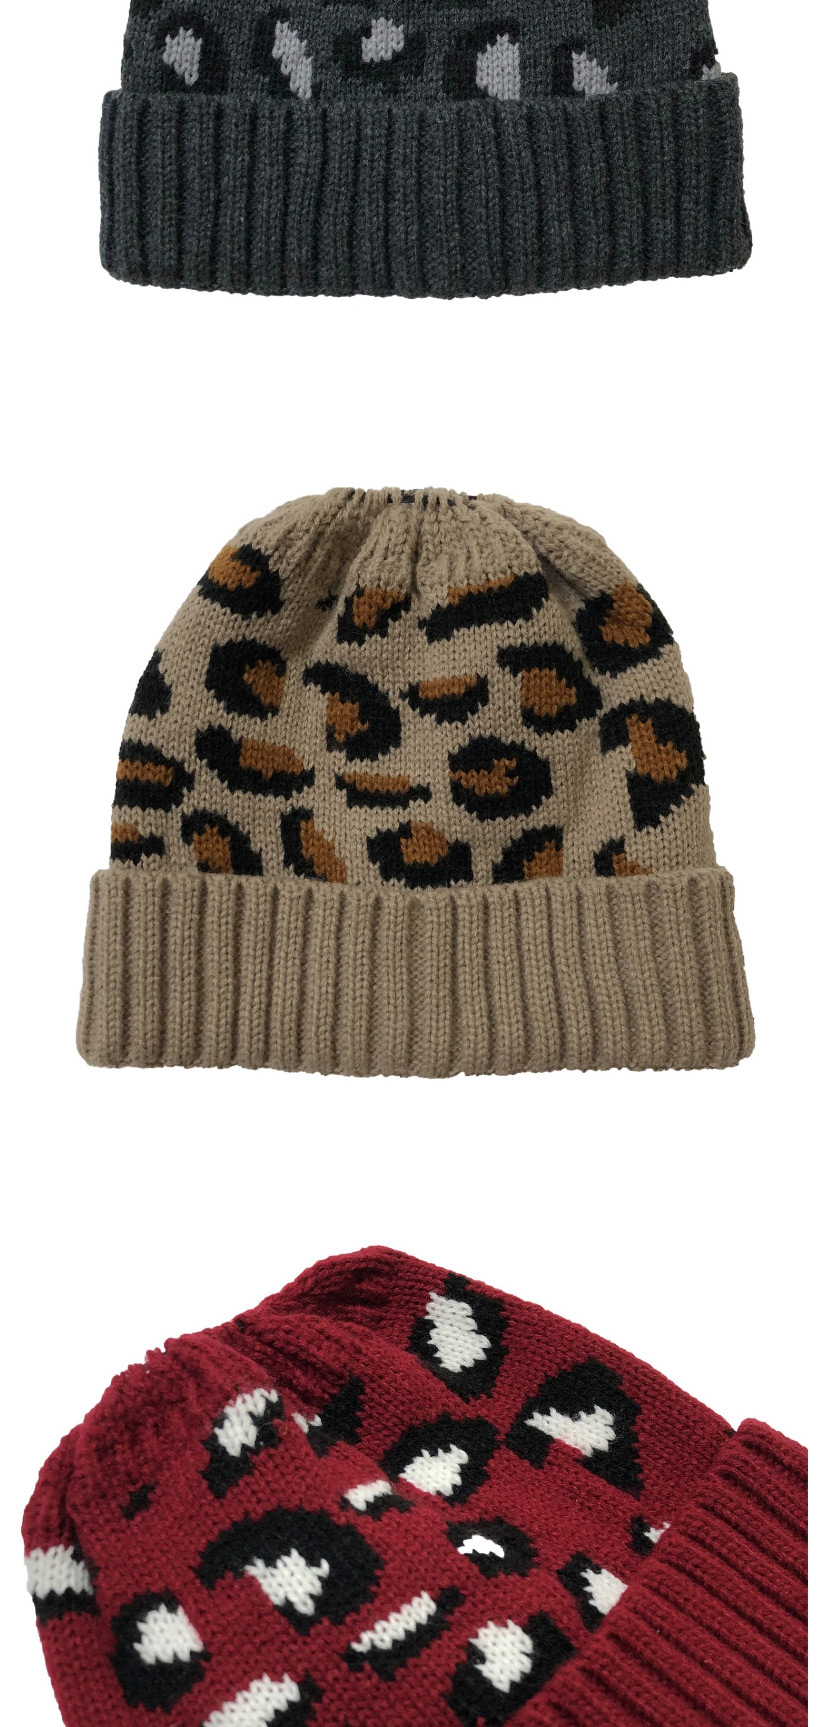 Fashion Camel Leopard Jacquard Ponytail Knitted Beanie,Knitting Wool Hats